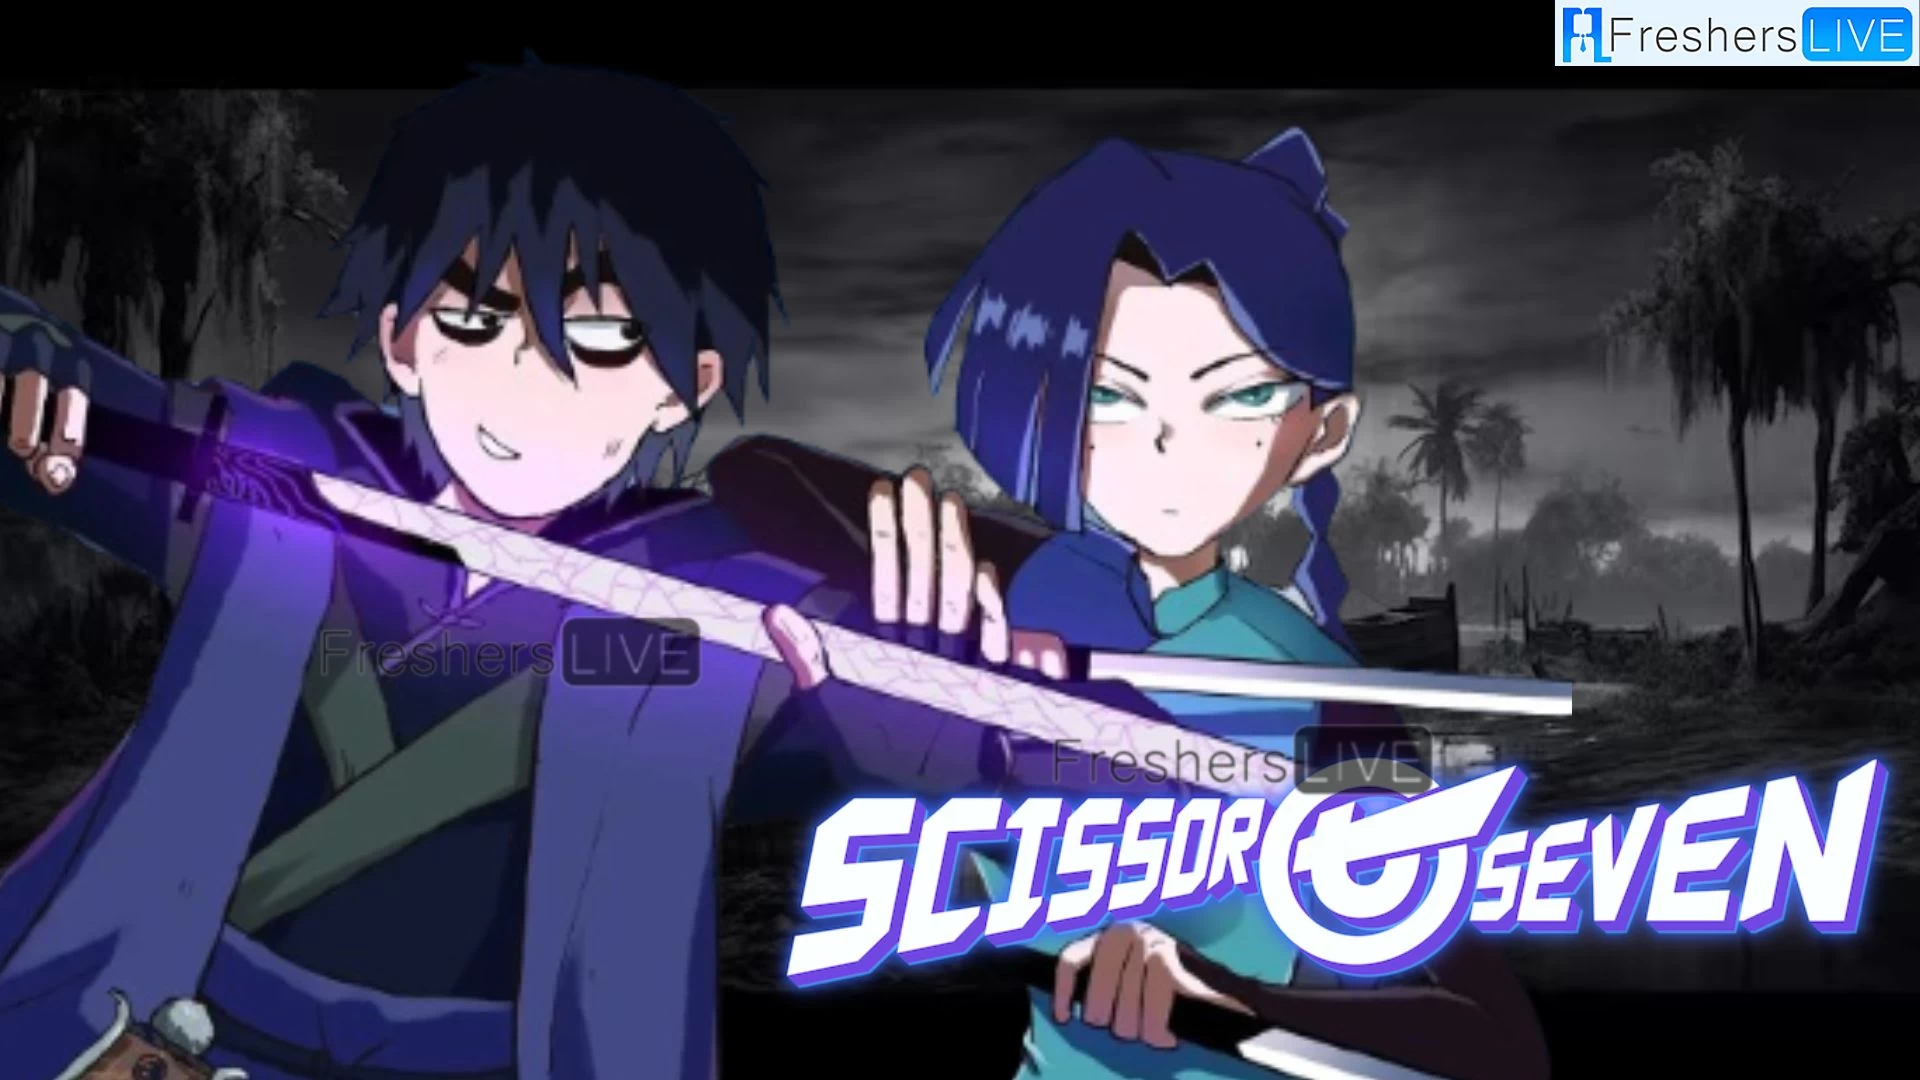 Scissor Seven Season 4 Episode 10 Ending Explained, Release Date, Cast, Review, Where to Watch, and More